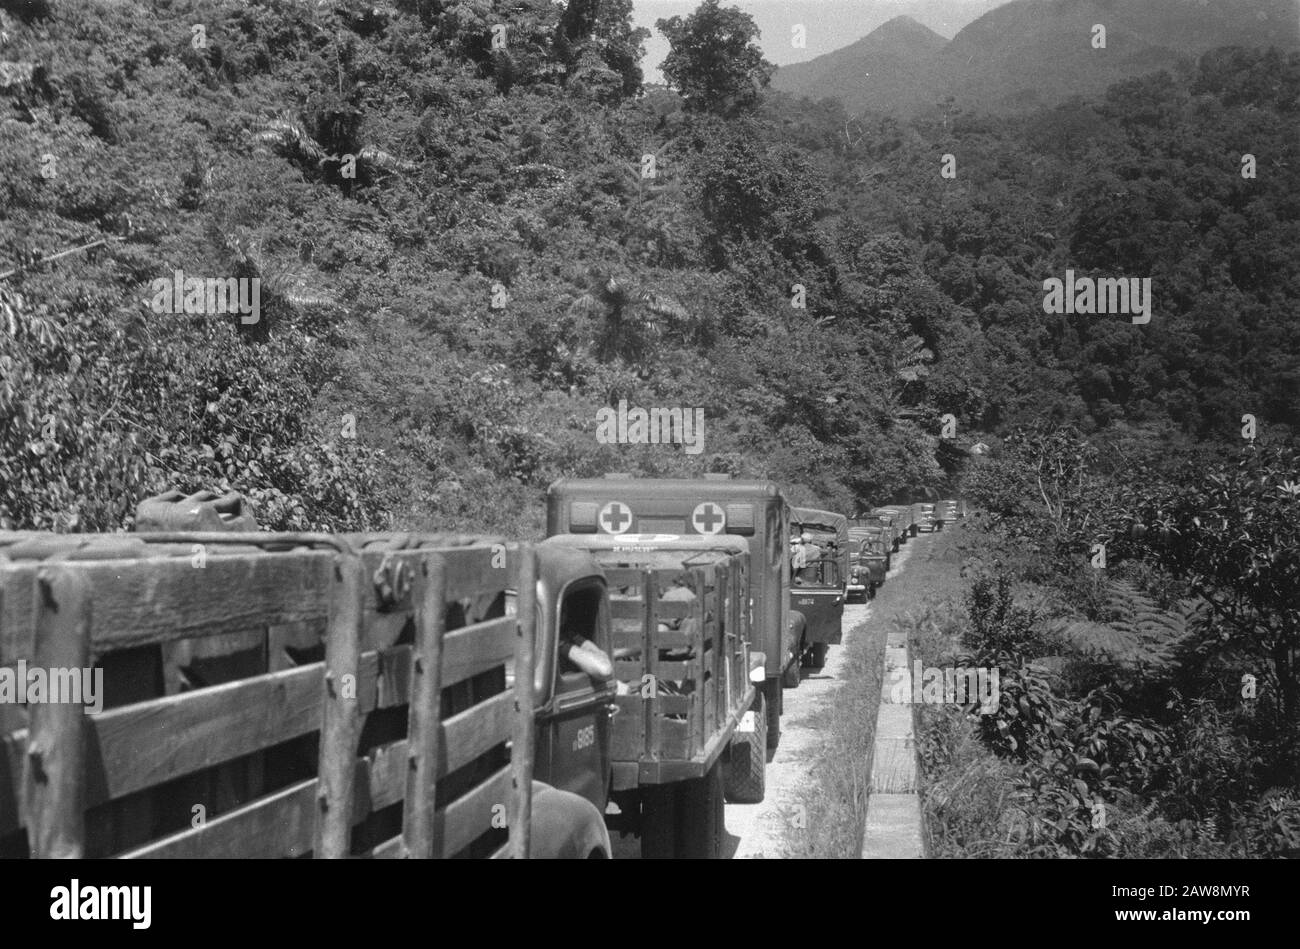 march to Fort van der Capellen and Fort de Kock (Anei Gorge)  [Long military column on a mountain road] Date: December 29, 1948 Location: Bukittinggi, Indonesia, Dutch East Indies, Sumatra Stock Photo